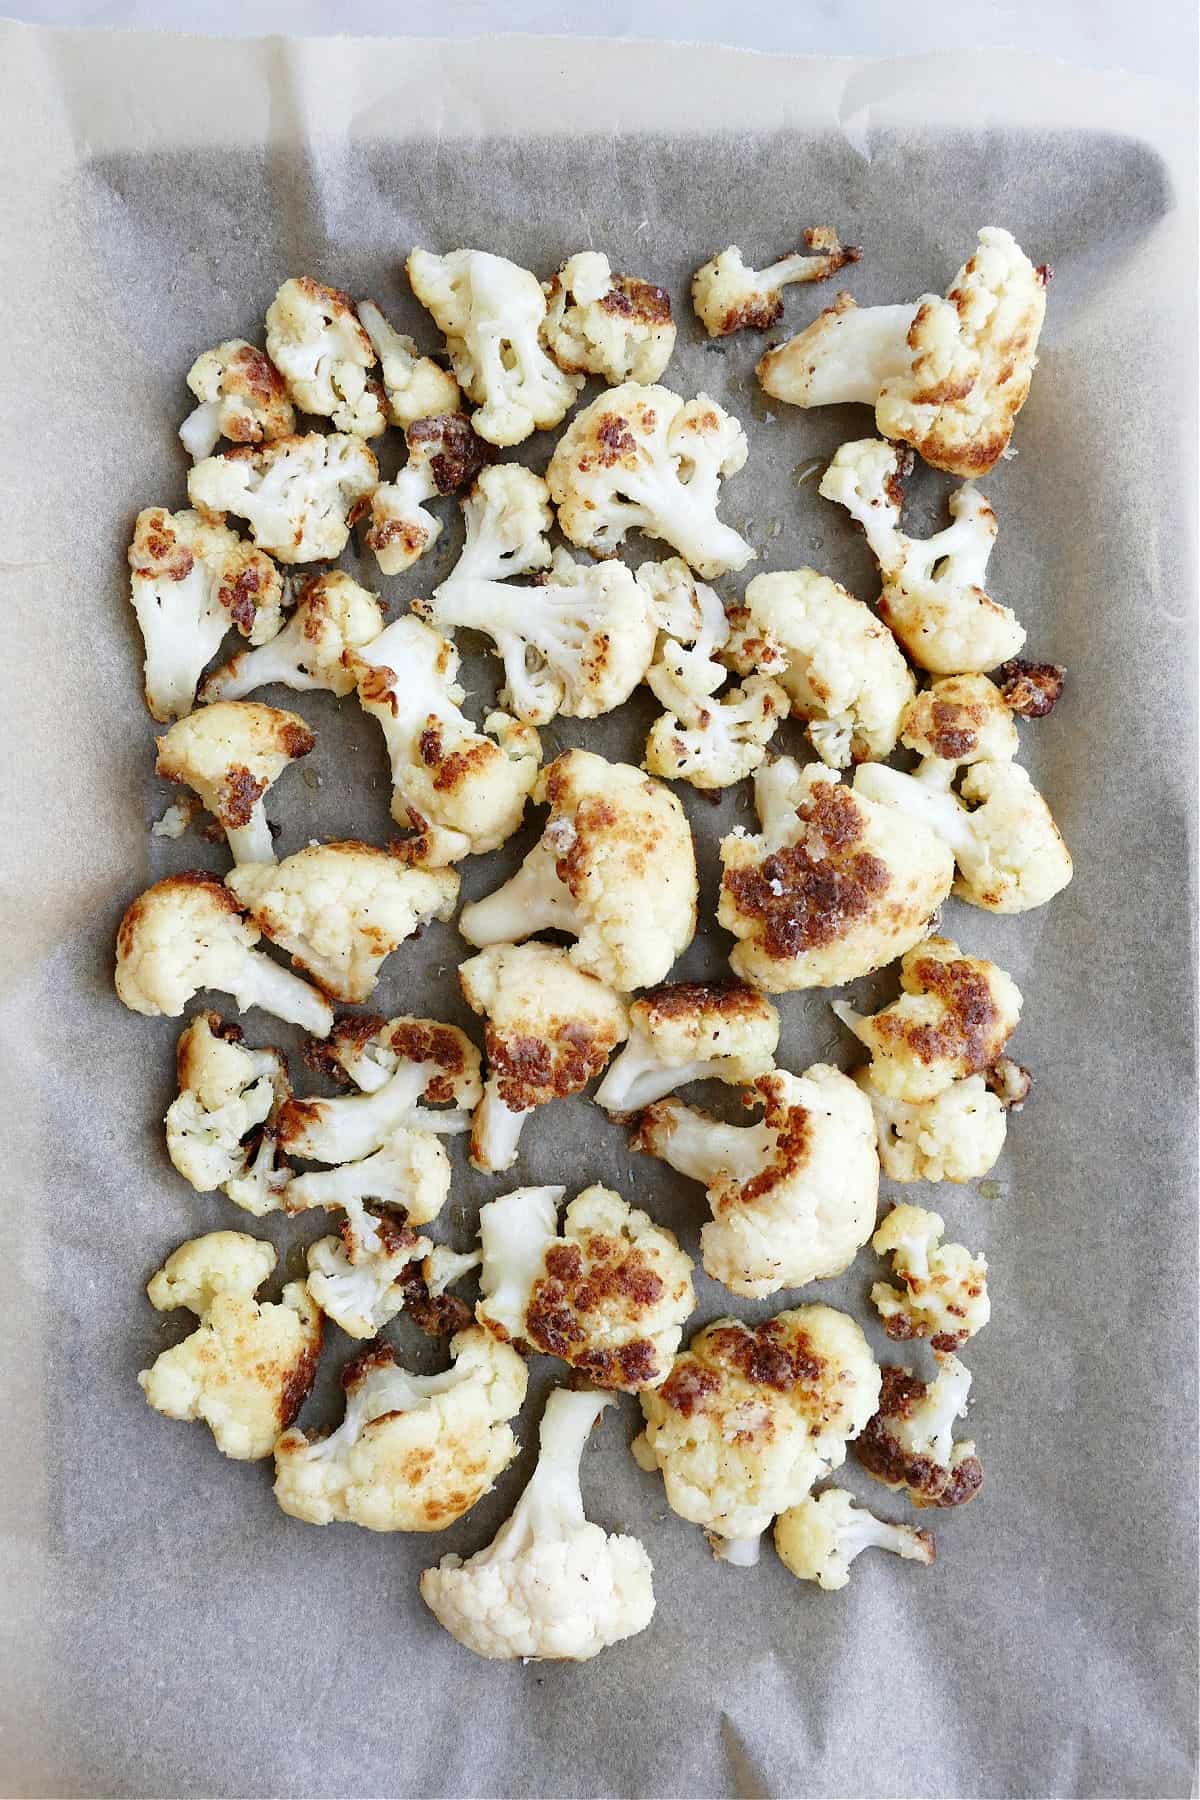 crispy cauliflower spread out on a baking sheet lined with parchment paper